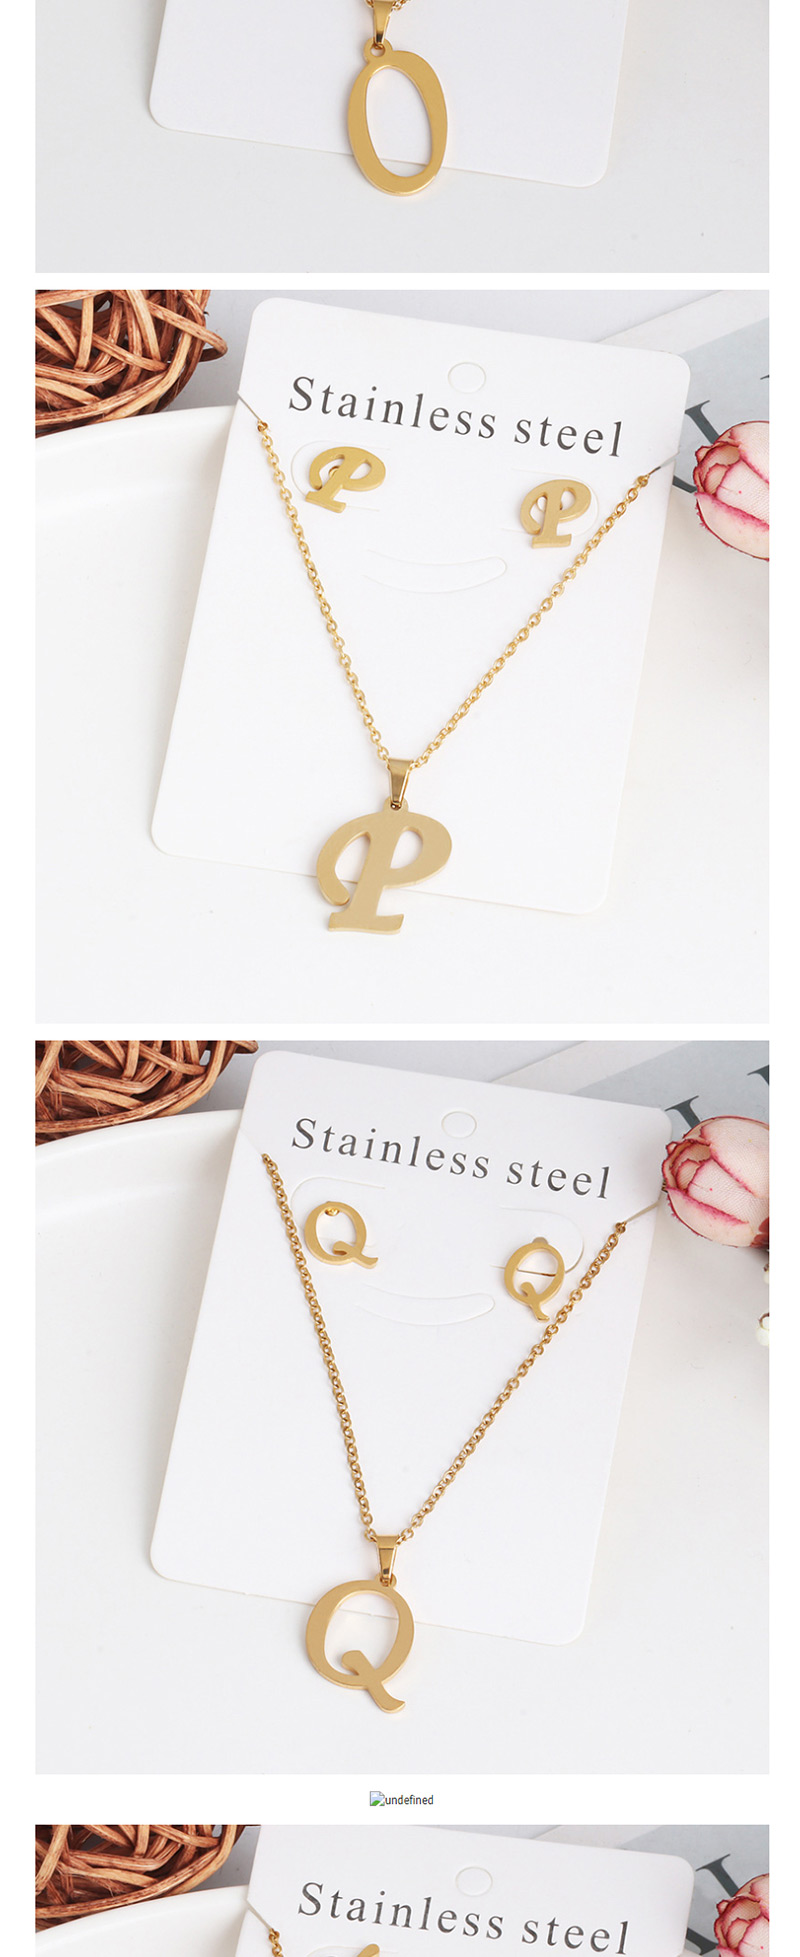 Fashion Q Gold Stainless Steel Letter Necklace Earrings Two-piece,Jewelry Sets